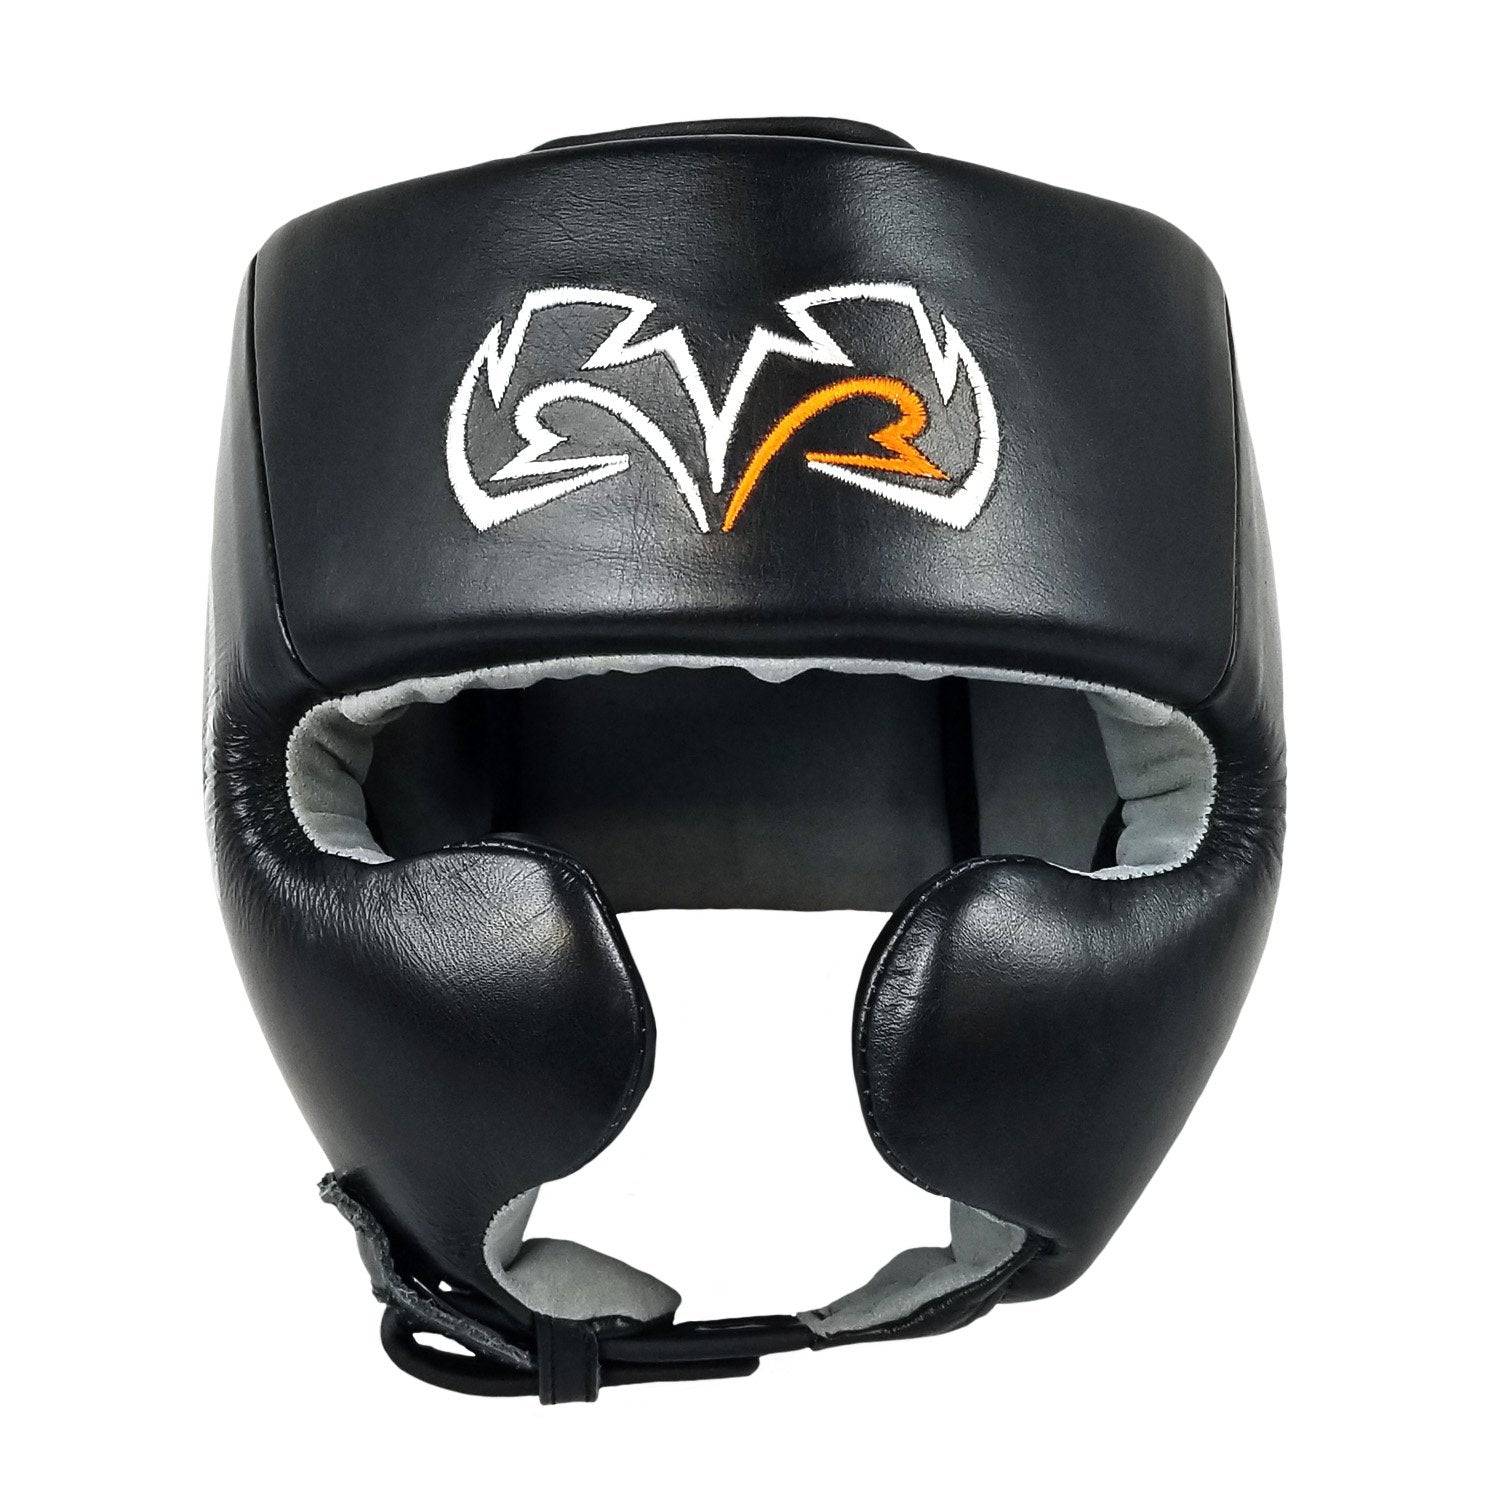 Rival | Training Headgear - RHG20 - XTC Fitness - Exercise Equipment Superstore - Canada - Head Gear